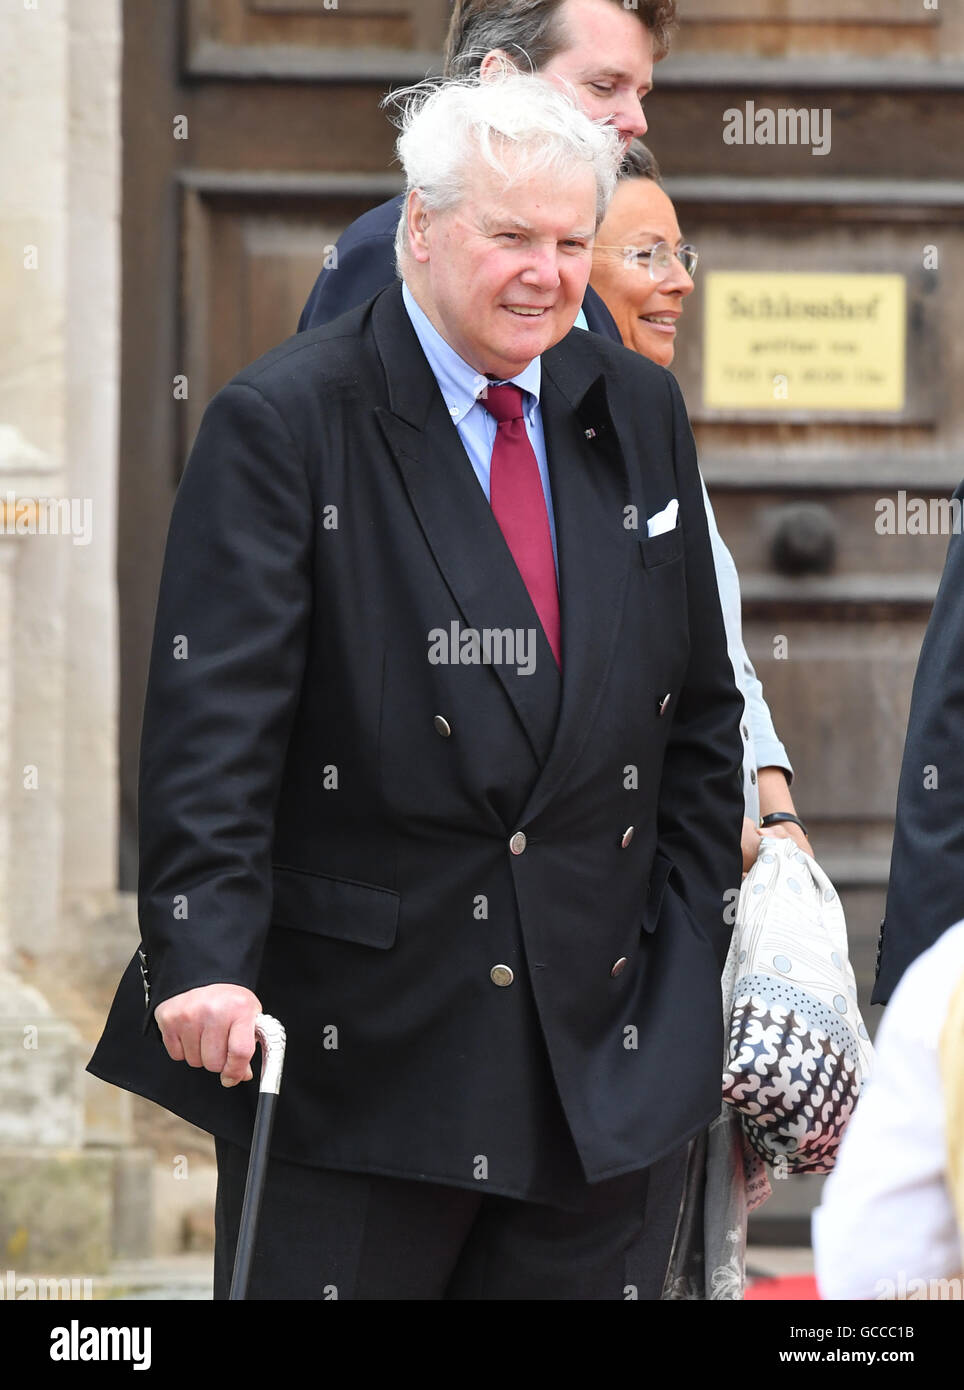 Gotha, Germany. 9th July, 2016. Andreas Prince of Saxony-Coburg and Gotha waits for Albert II, Prince of Monaco, at Friedenstein Castle in Gotha, Germany, 9 July 2016. The prince wants to visit the state exhibition 'The Ernestinians. A dynasty shapes Europe'. He is on a one-day visit to the former royal seat. Photo: Jens Kalaene/dpa/Alamy Live News Stock Photo